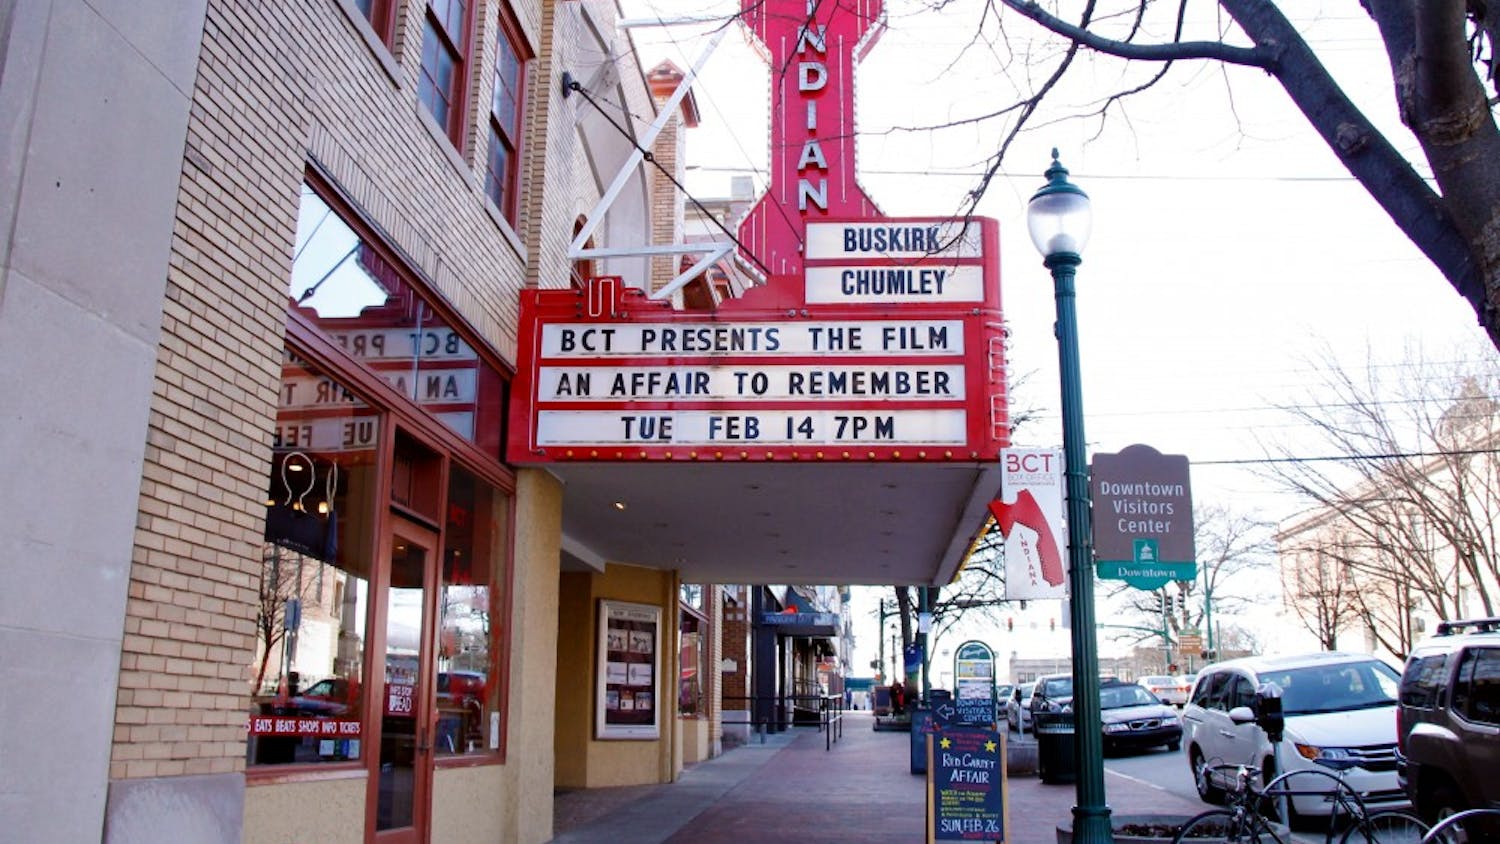 The Buskirk-Chumley Theater presented a special Valentine's Day screening of "An Affair to Remember" on Feb. 14, 2017. The Wild and Scenic Film Festival will take place Sunday.